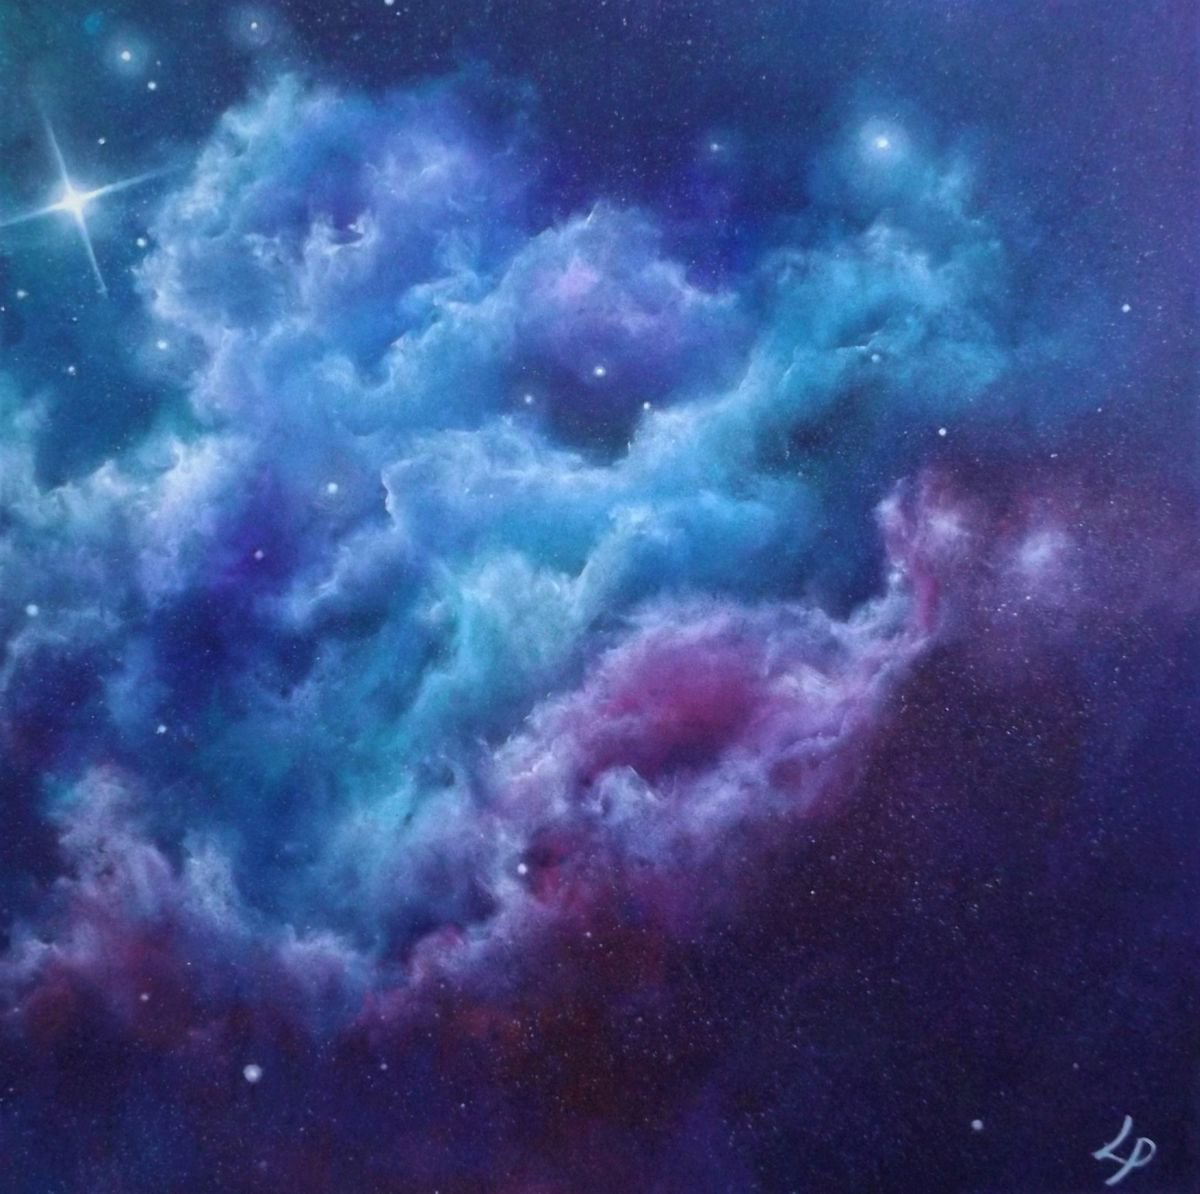 Ground Control To Major Tom - Space Art, finger-painted Nebula by Lisa Price